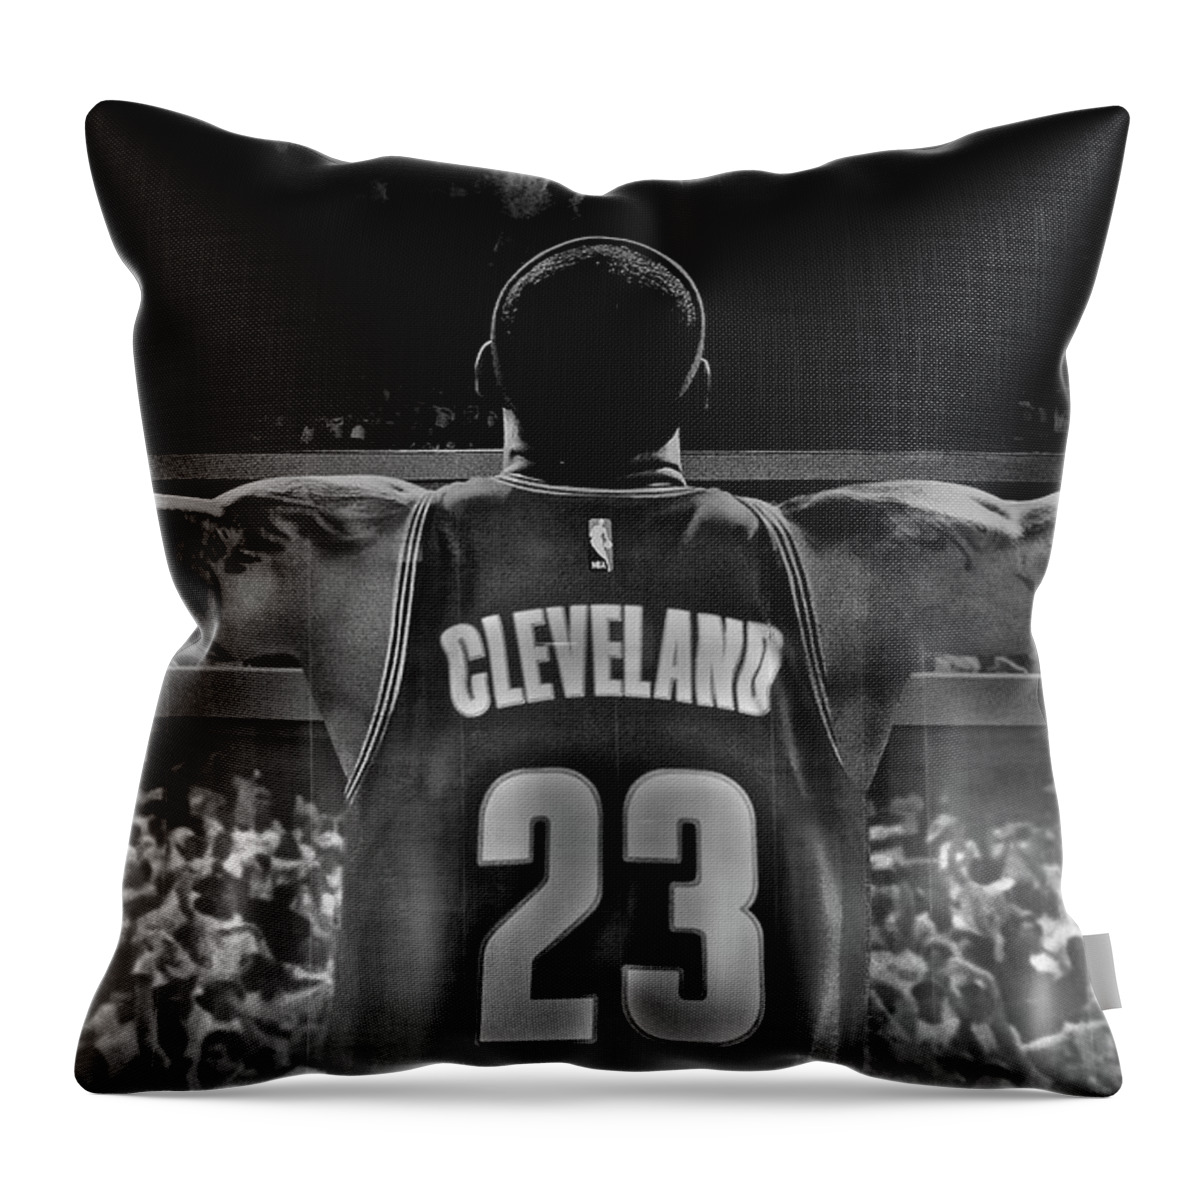 Lebron Throw Pillow featuring the photograph Thanks Lebron by Frozen in Time Fine Art Photography